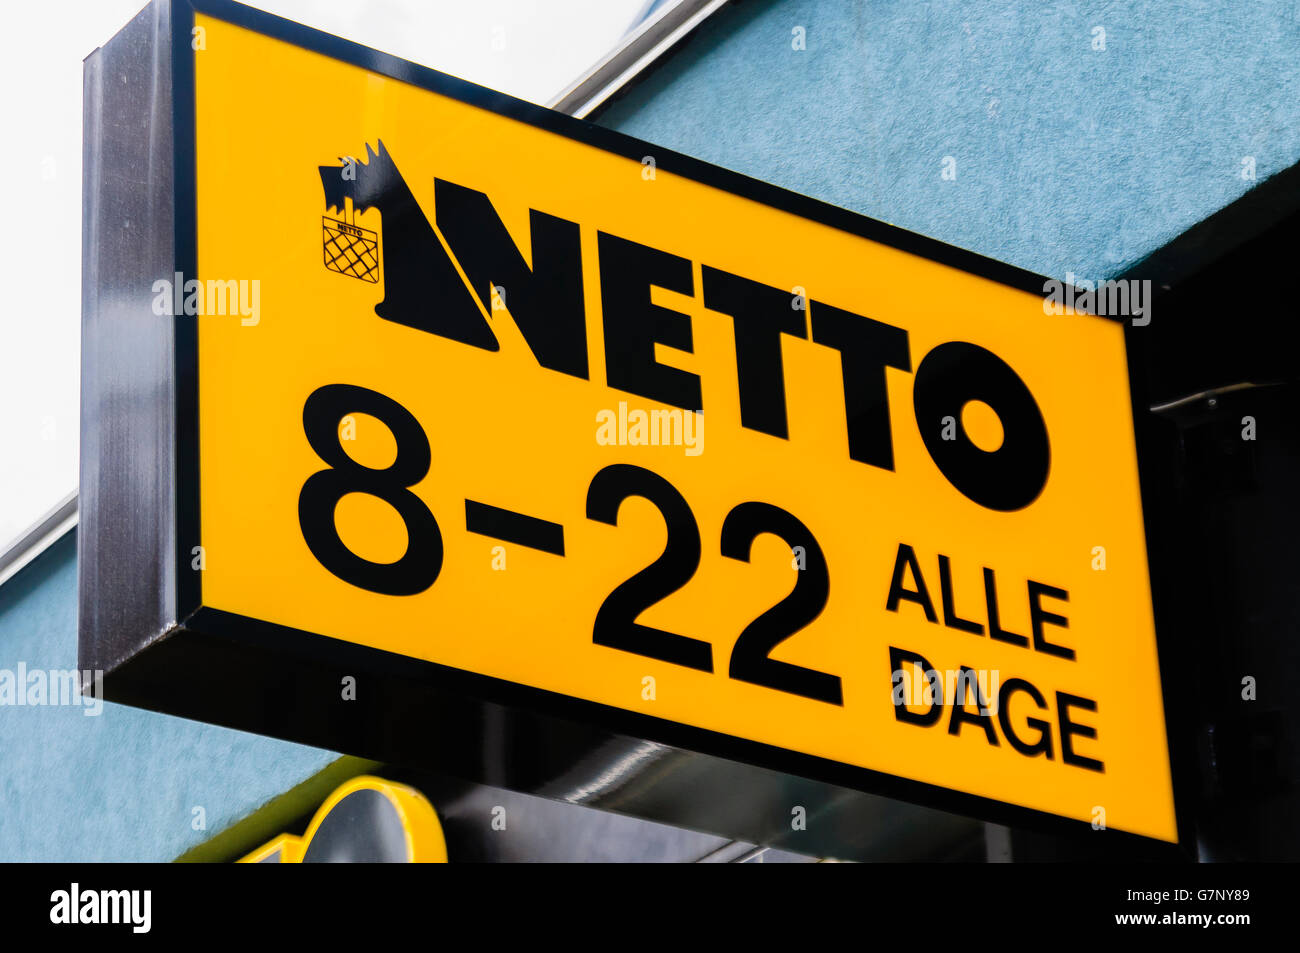 Sign for Netto, a Denmark based supermarket chain, with their Scottish Terrier logo Stock Photo